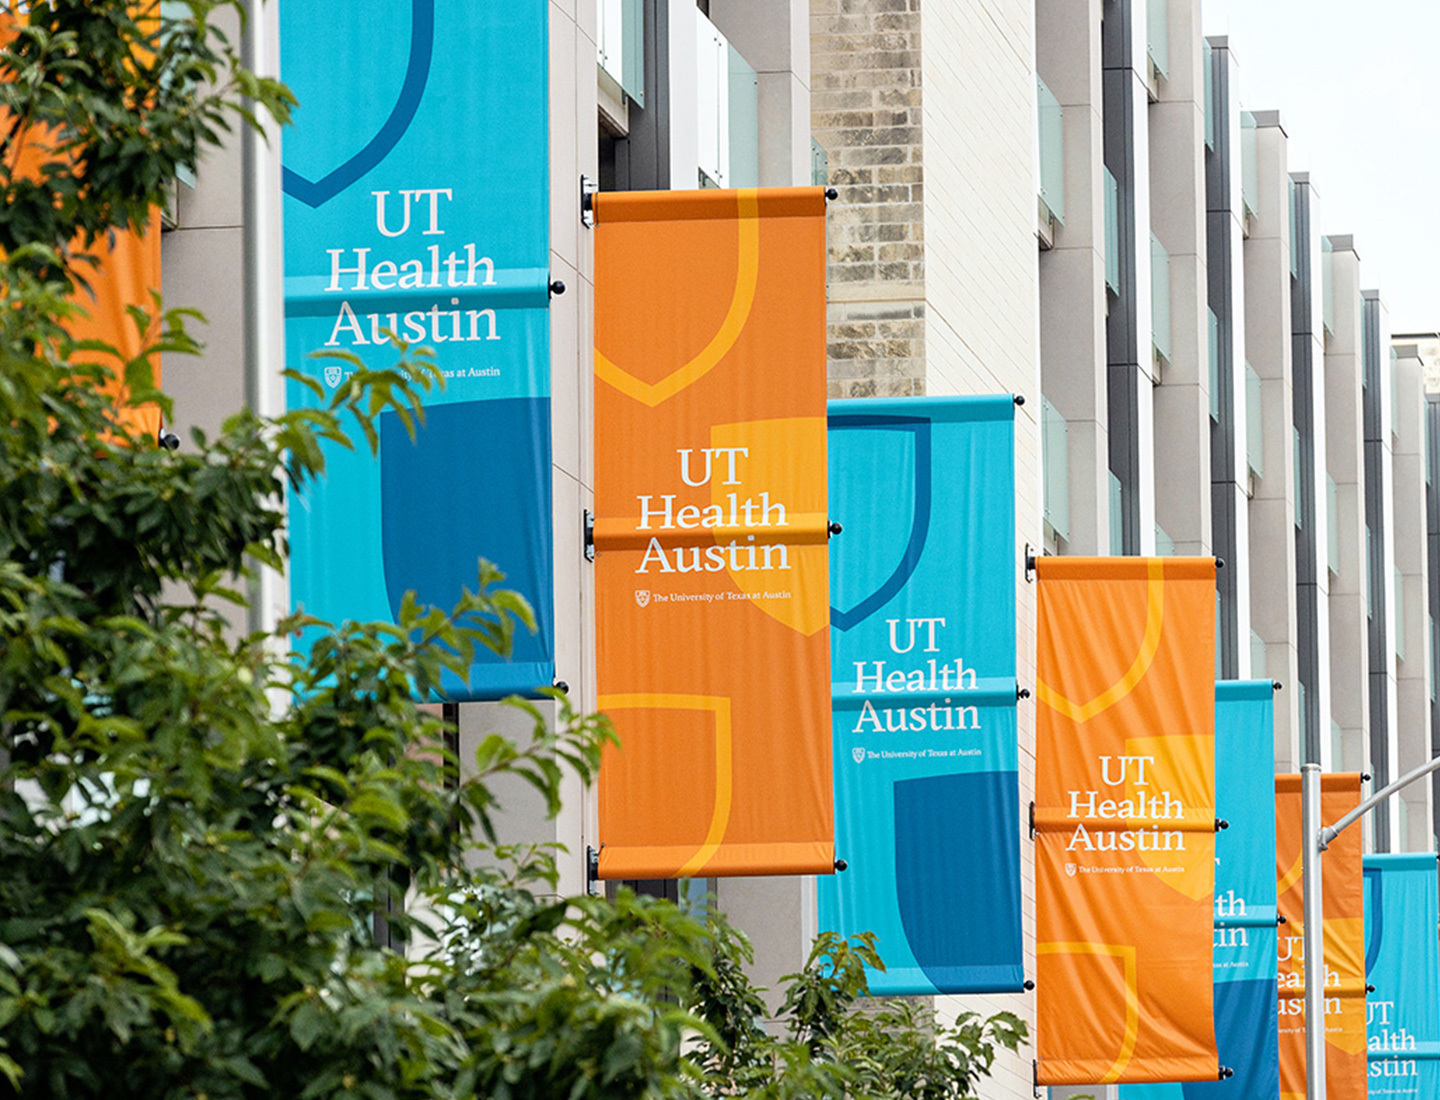 UT Health Austin building's west façade with UT Health Austin flags in alternating colors of teal and burnt orange.